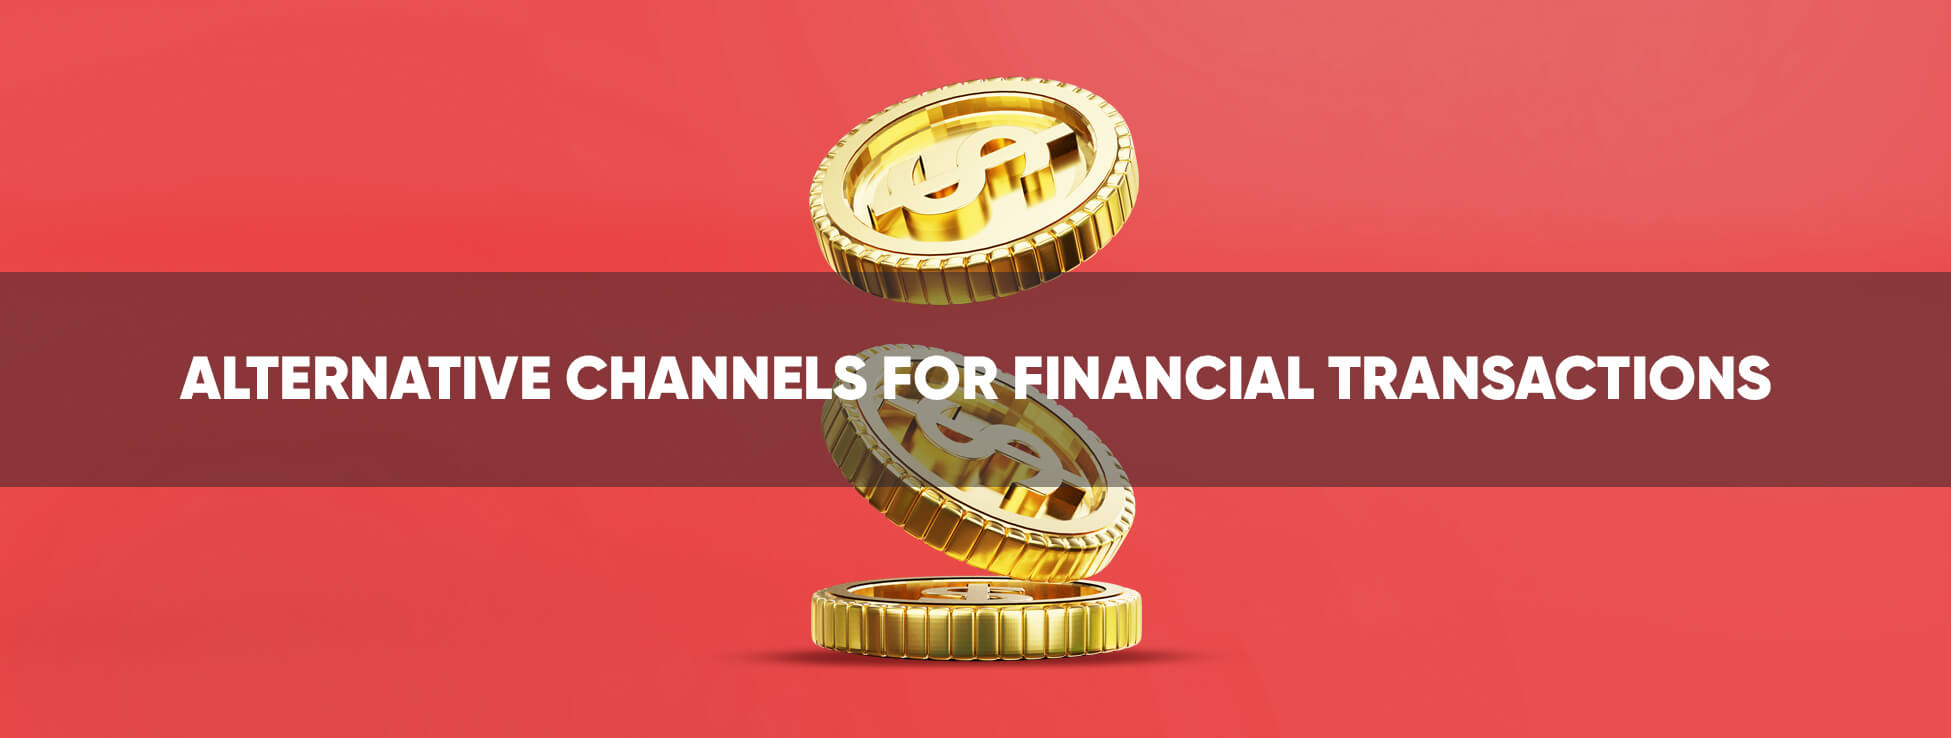 Alternative channels for financial transactions